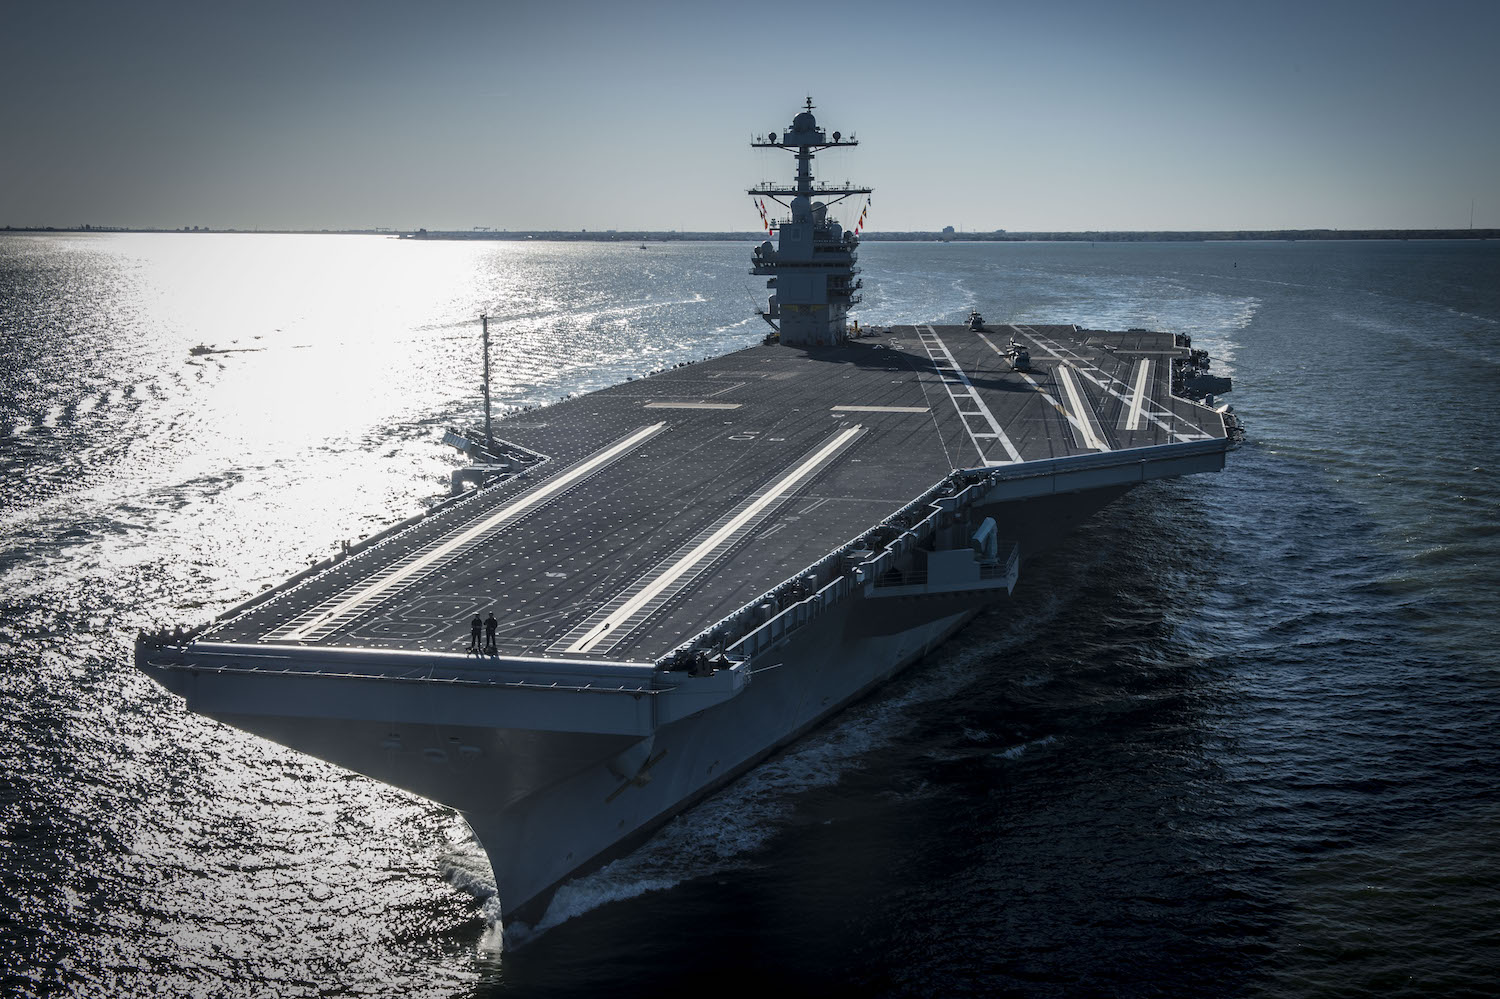 The USS Gerald Ford Navy aircraft carrier on its maiden voyage.